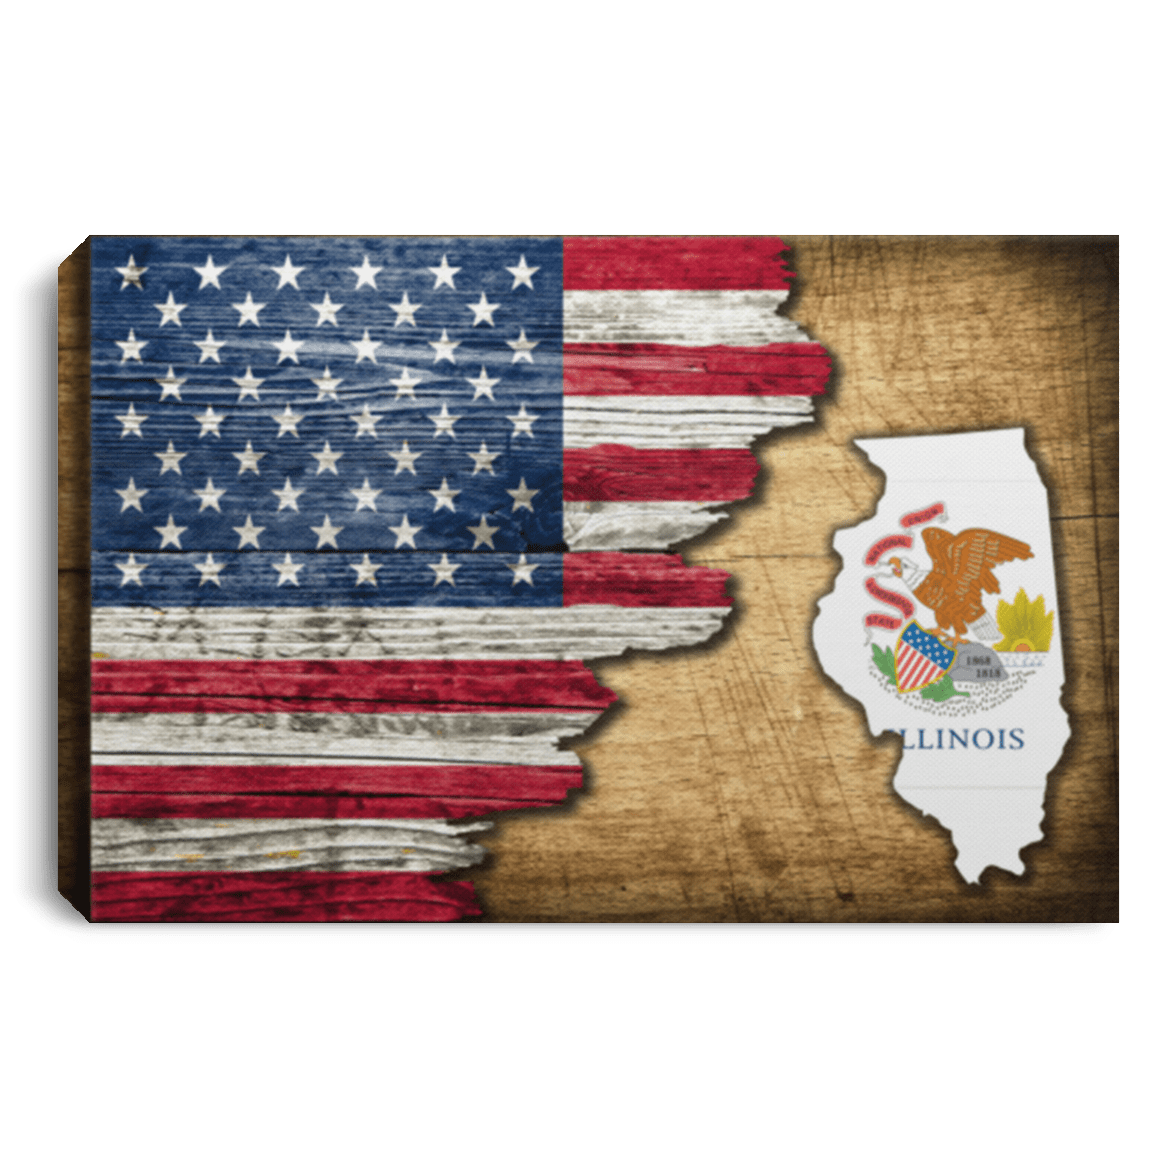 United States/Illinois Flag Ripped Effect 12X8 Inches Landscape Canvas .75In Frame